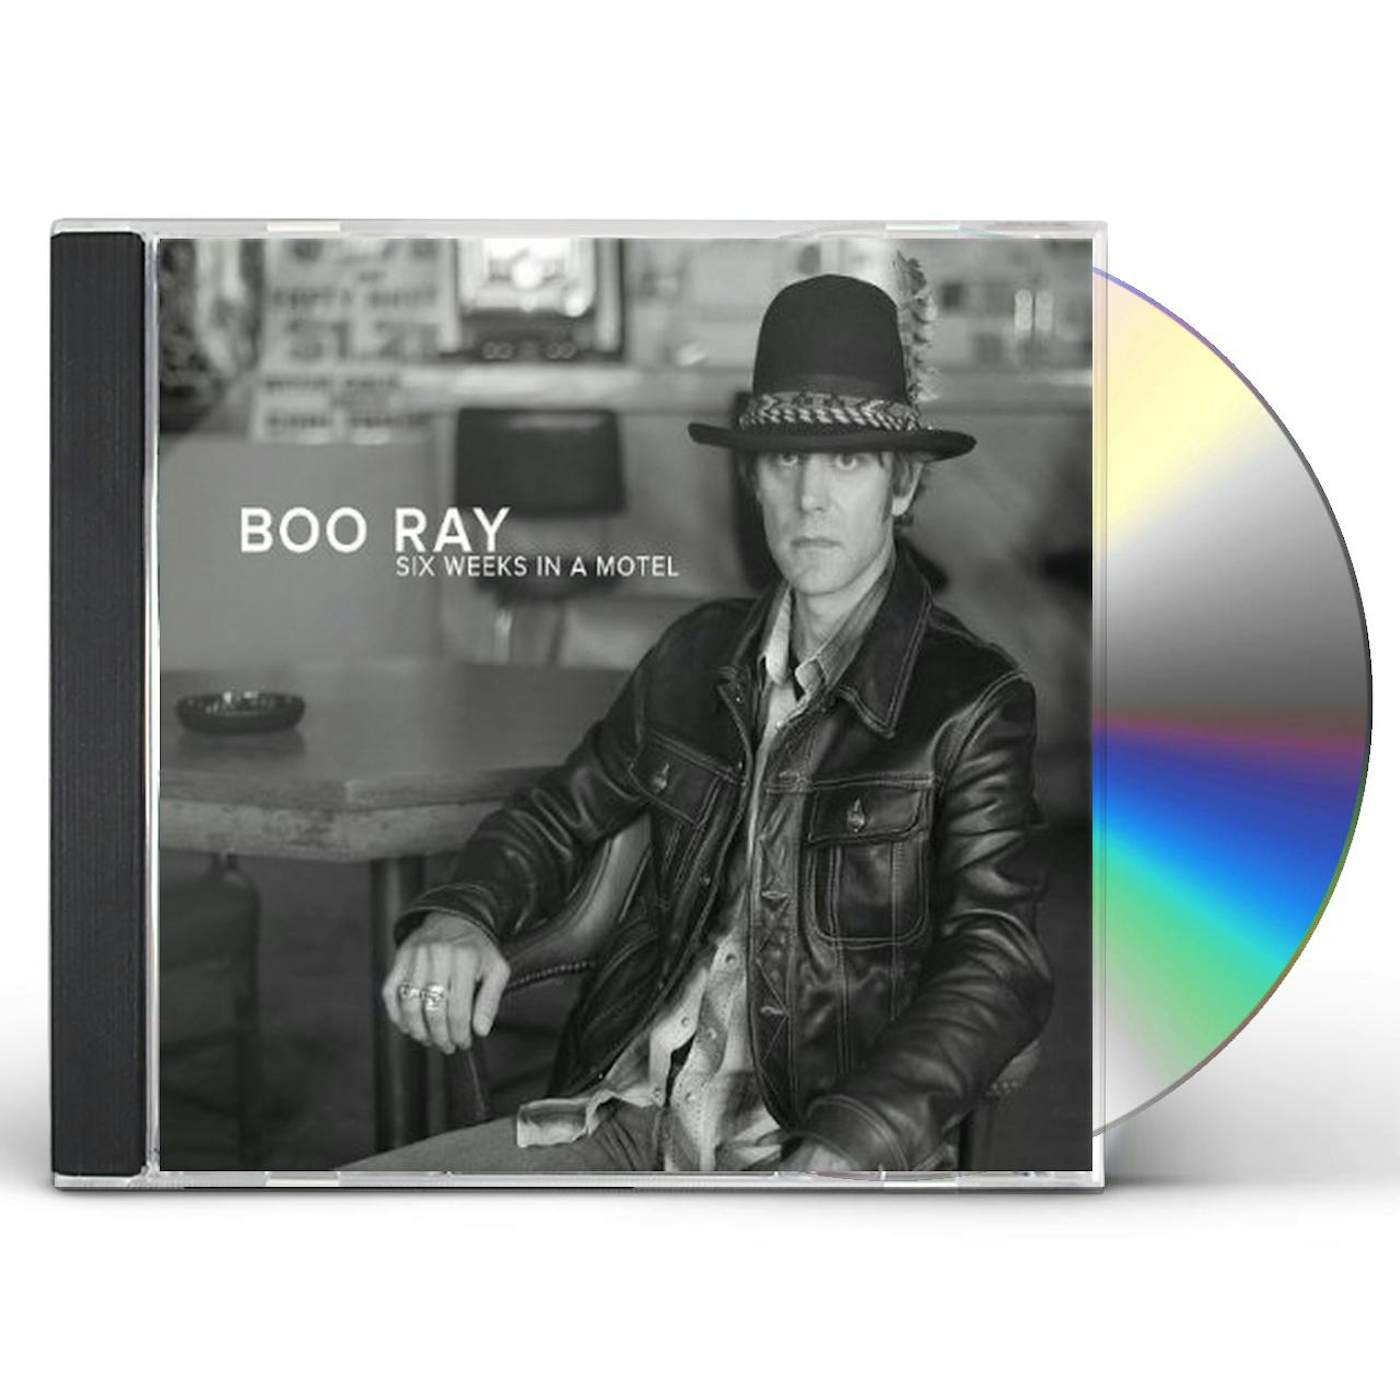 Boo Ray SIX WEEKS IN A MOTEL CD